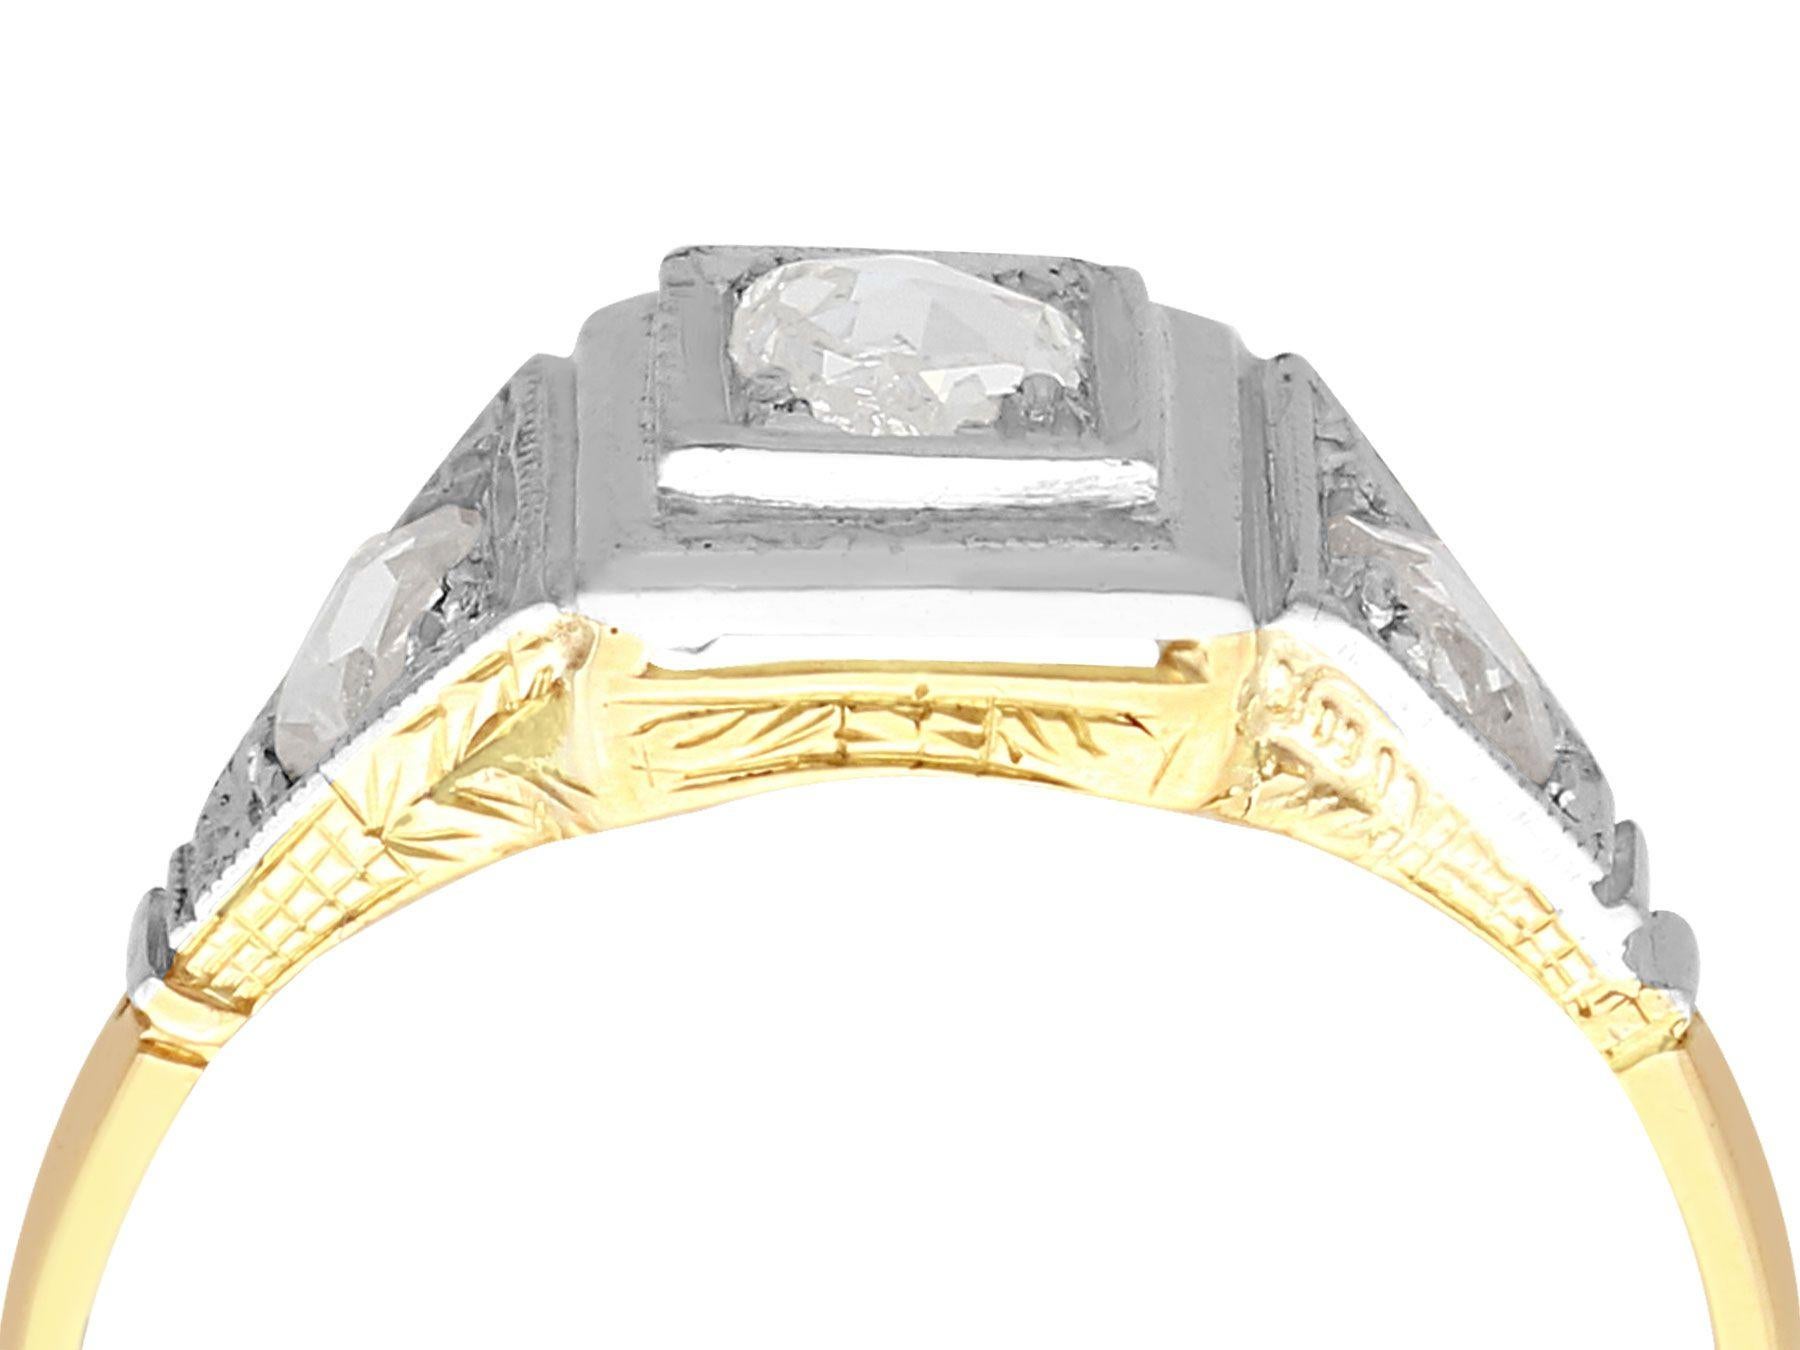 A fine and impressive antique 0.65 carat diamond and 18 karat yellow gold, 14 karat white gold set dress ring; part of our jewelry and estate jewelry collections

This fine and impressive antique diamond ring has been crafted in 18k yellow gold with